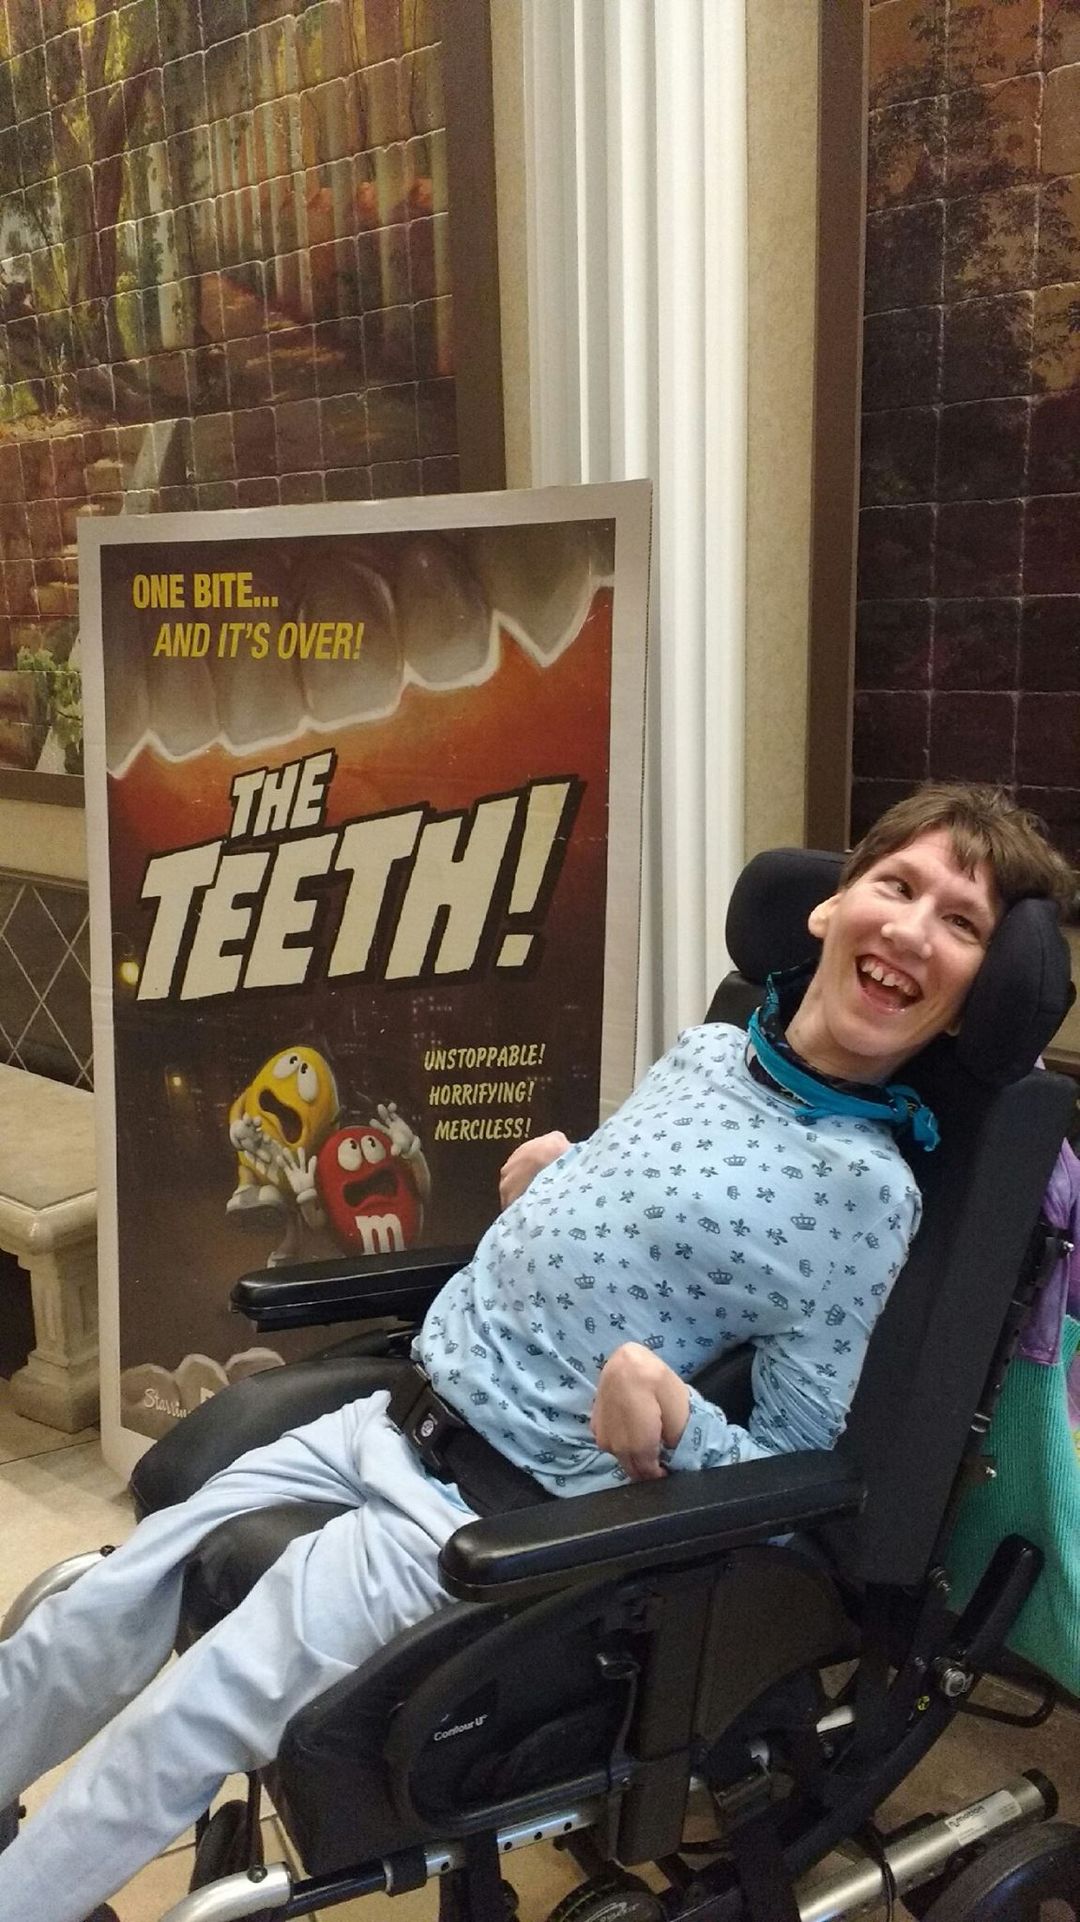 Jackie is in front of a sign with M&M's that says "The Teeth!"